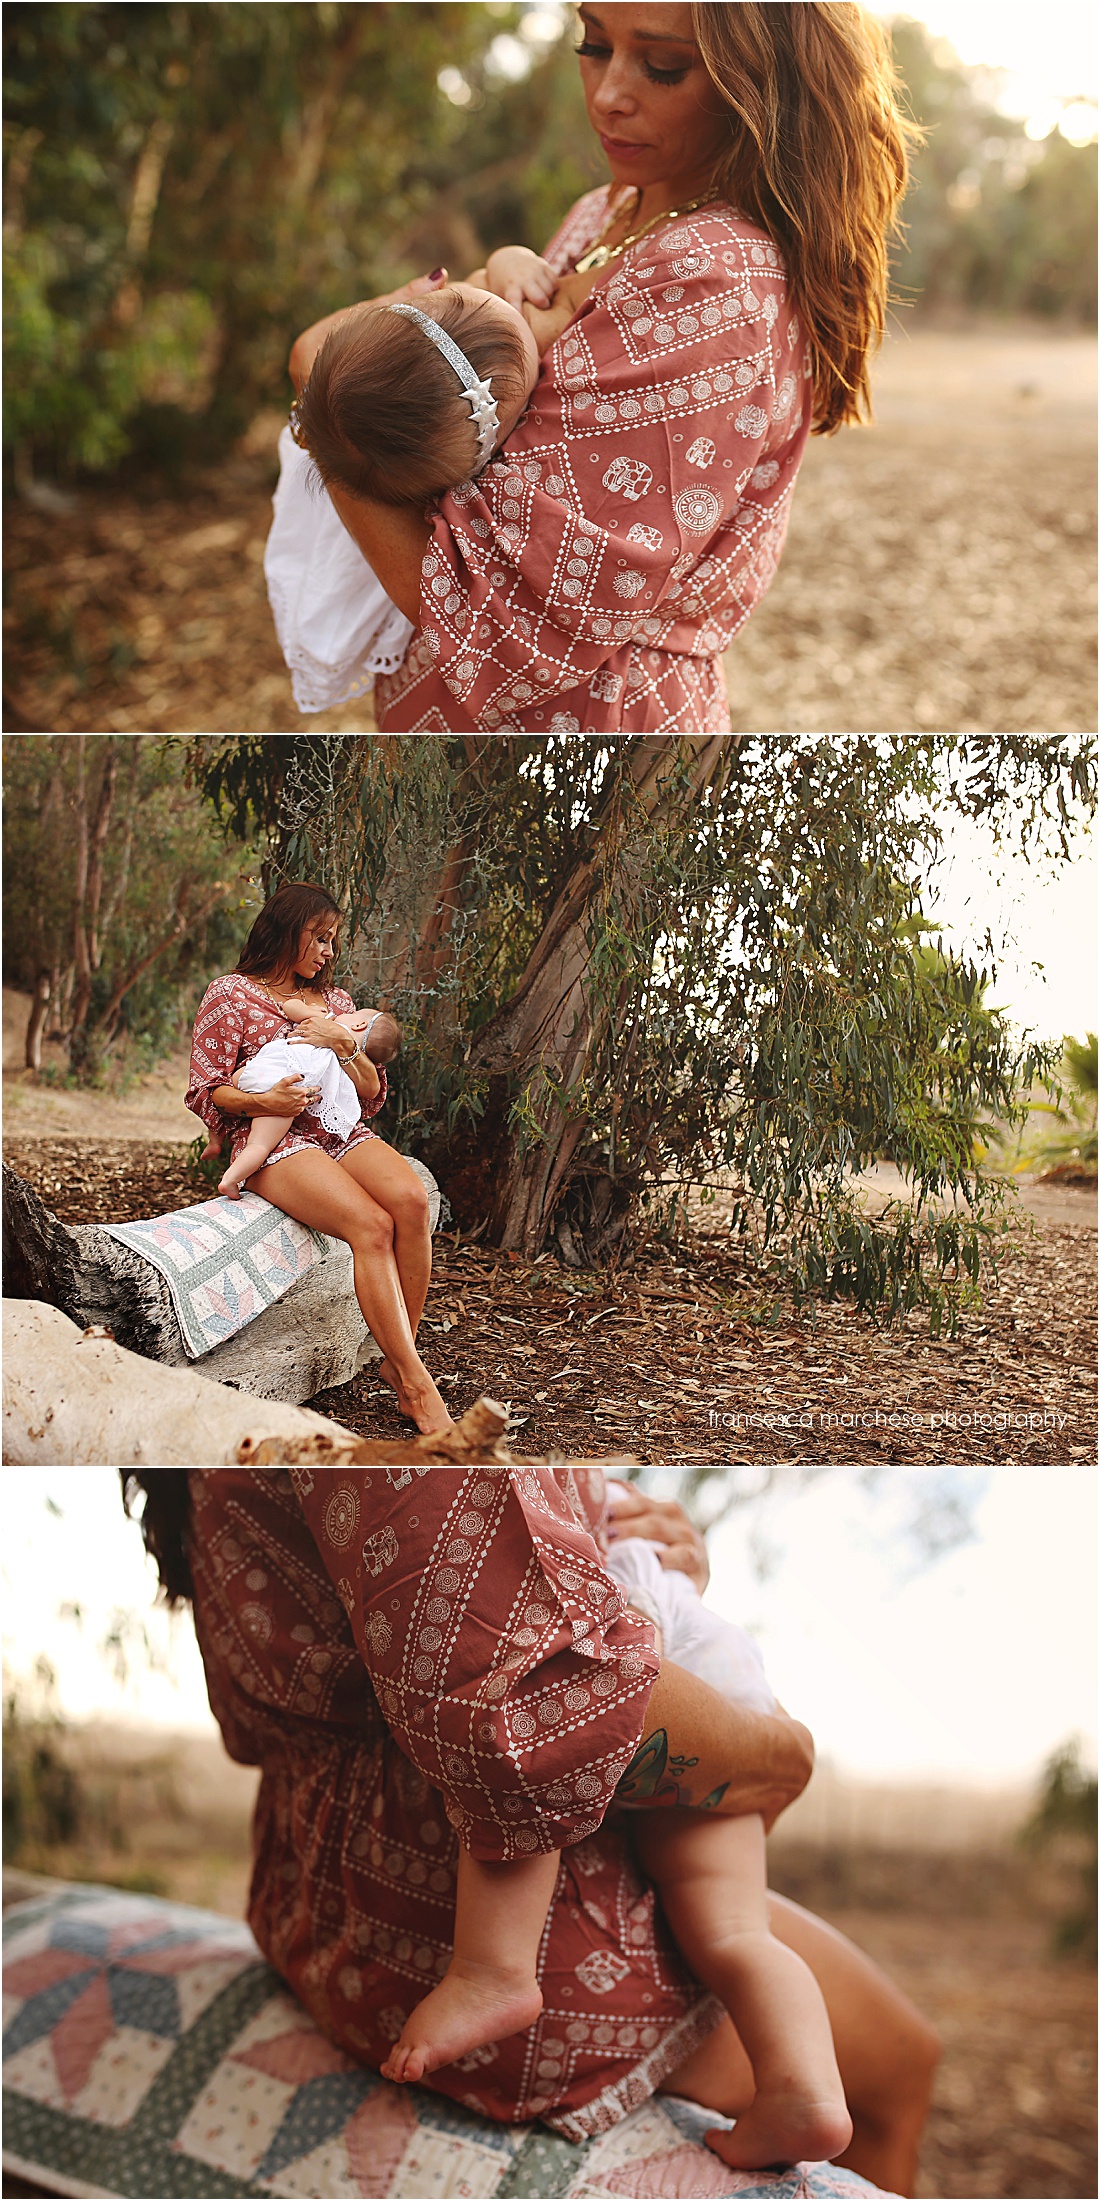 Breastfeeding photography session - Francesca Marchese Photography - Long Beach